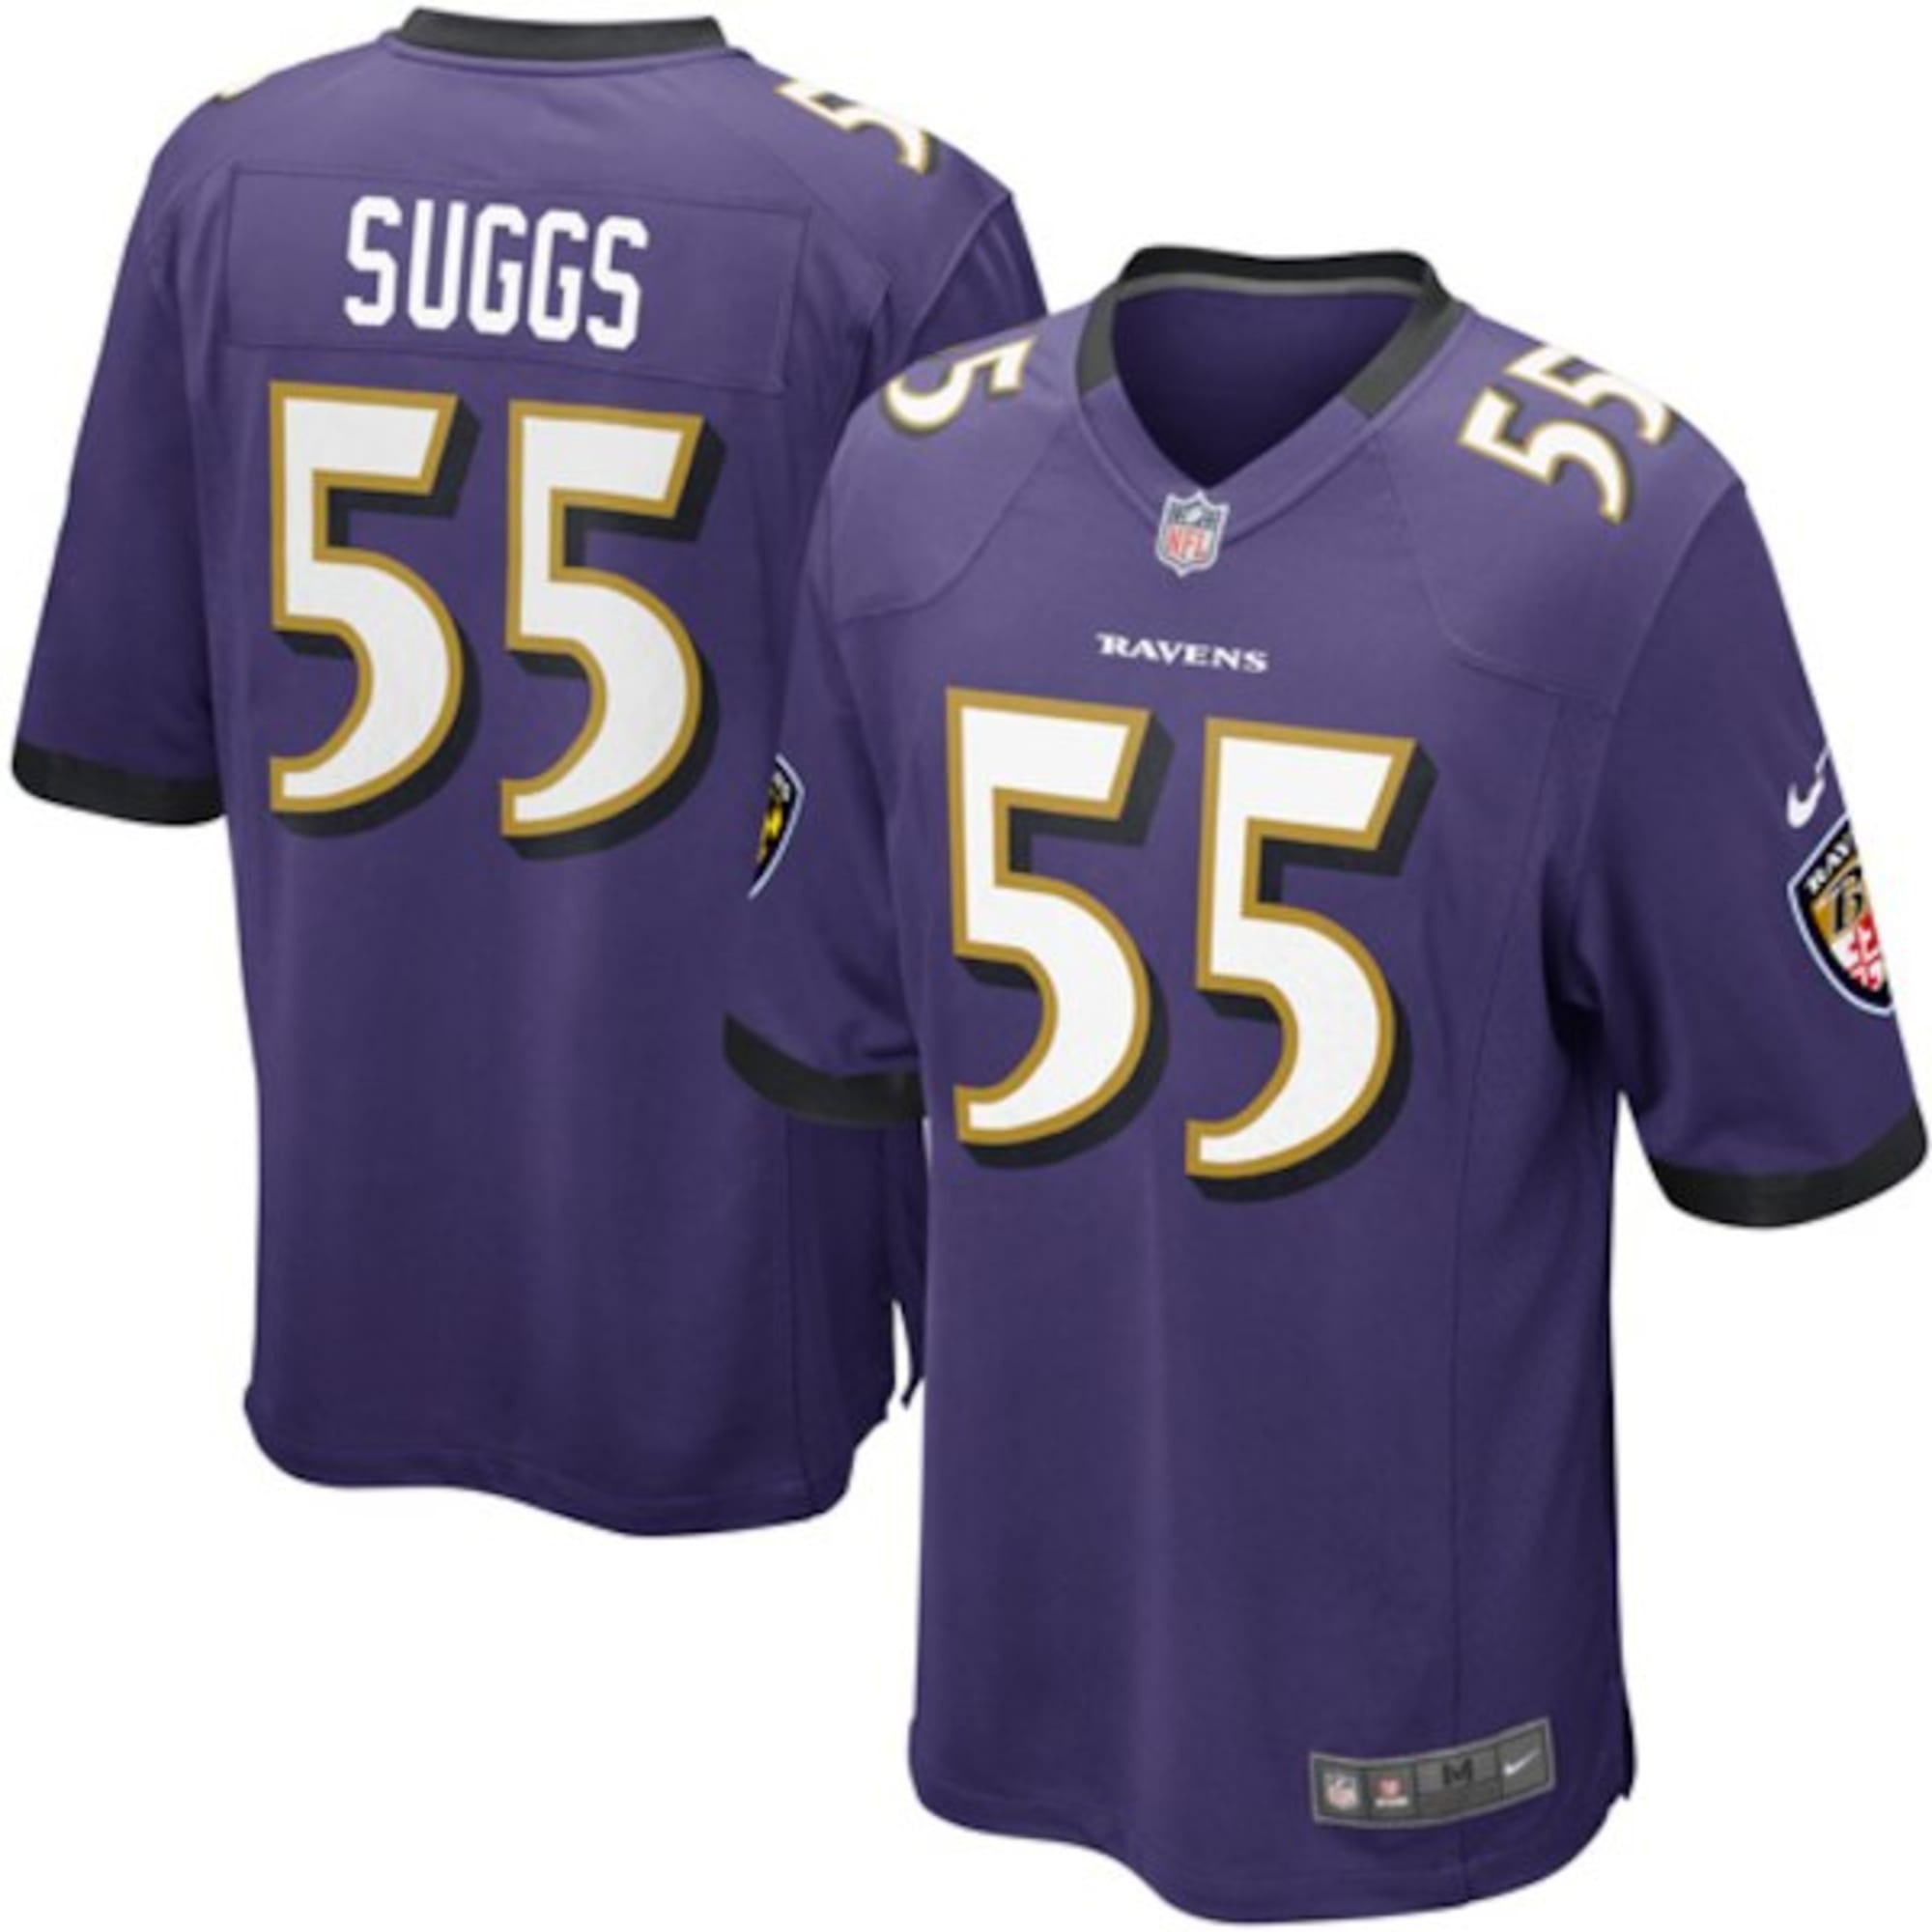 Must-have Baltimore Ravens items for 